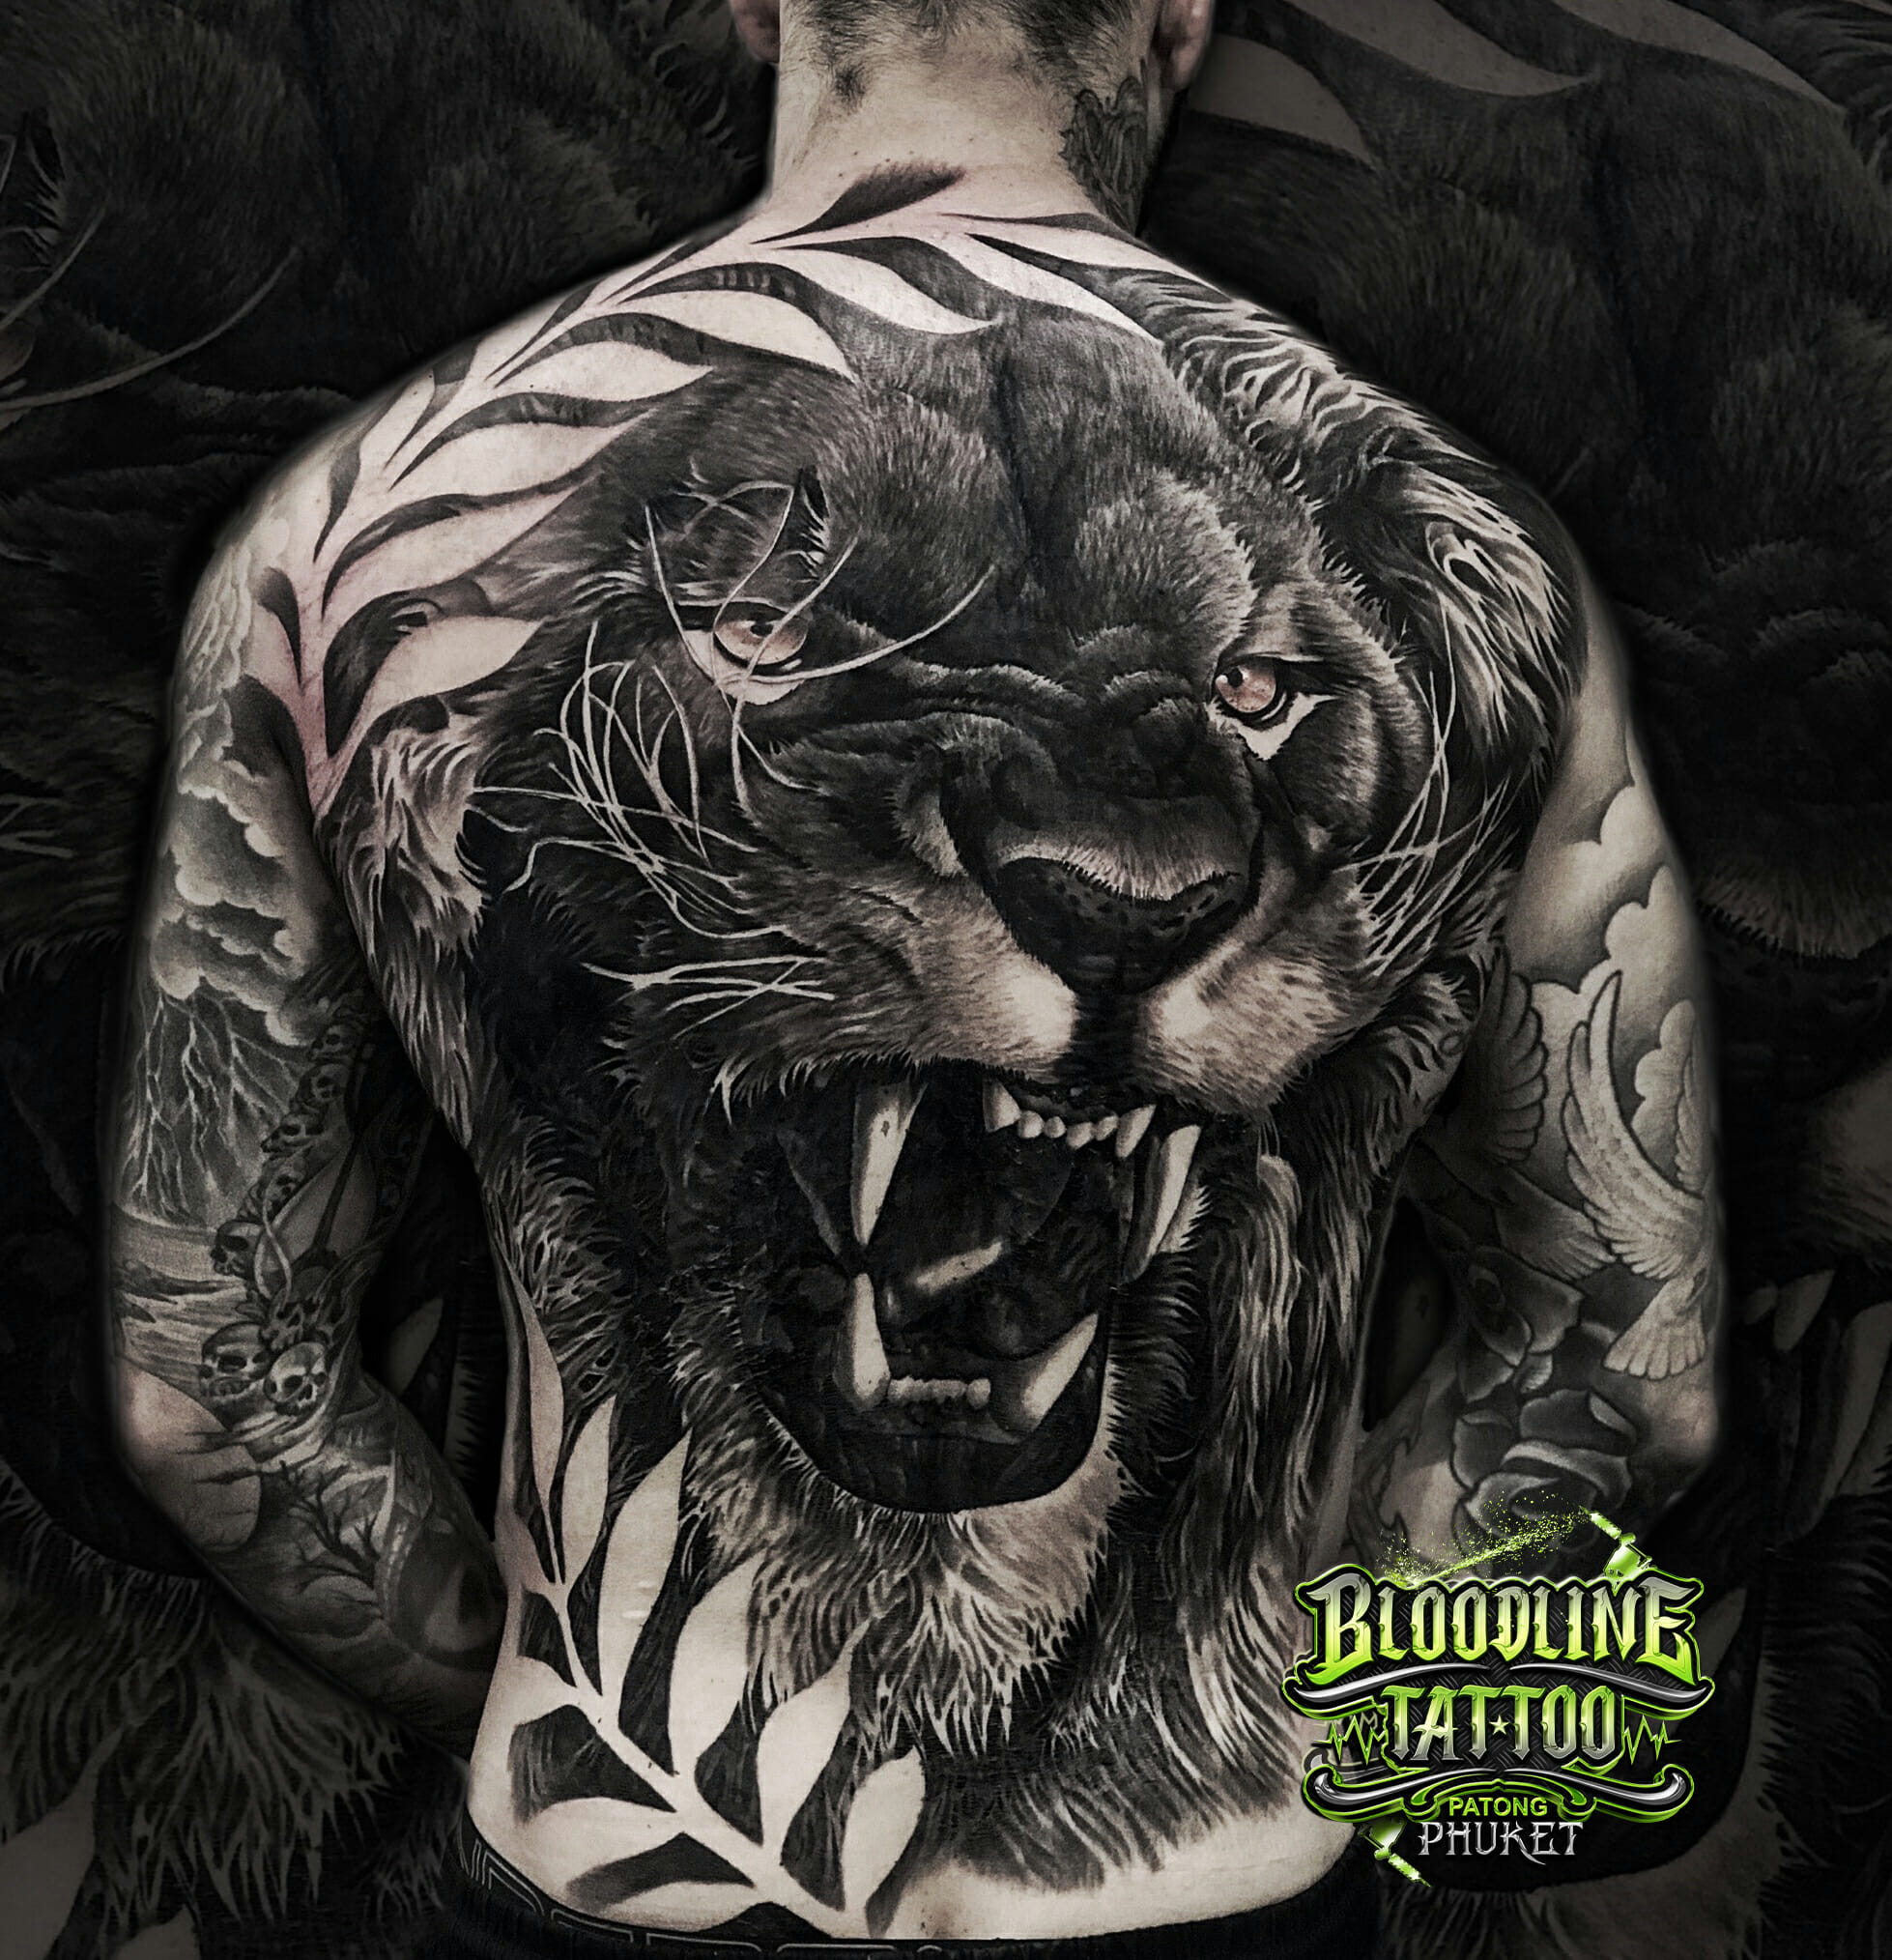 Top 5 tattoo parlours Bangkok You Should Add to Your List | Thaiger